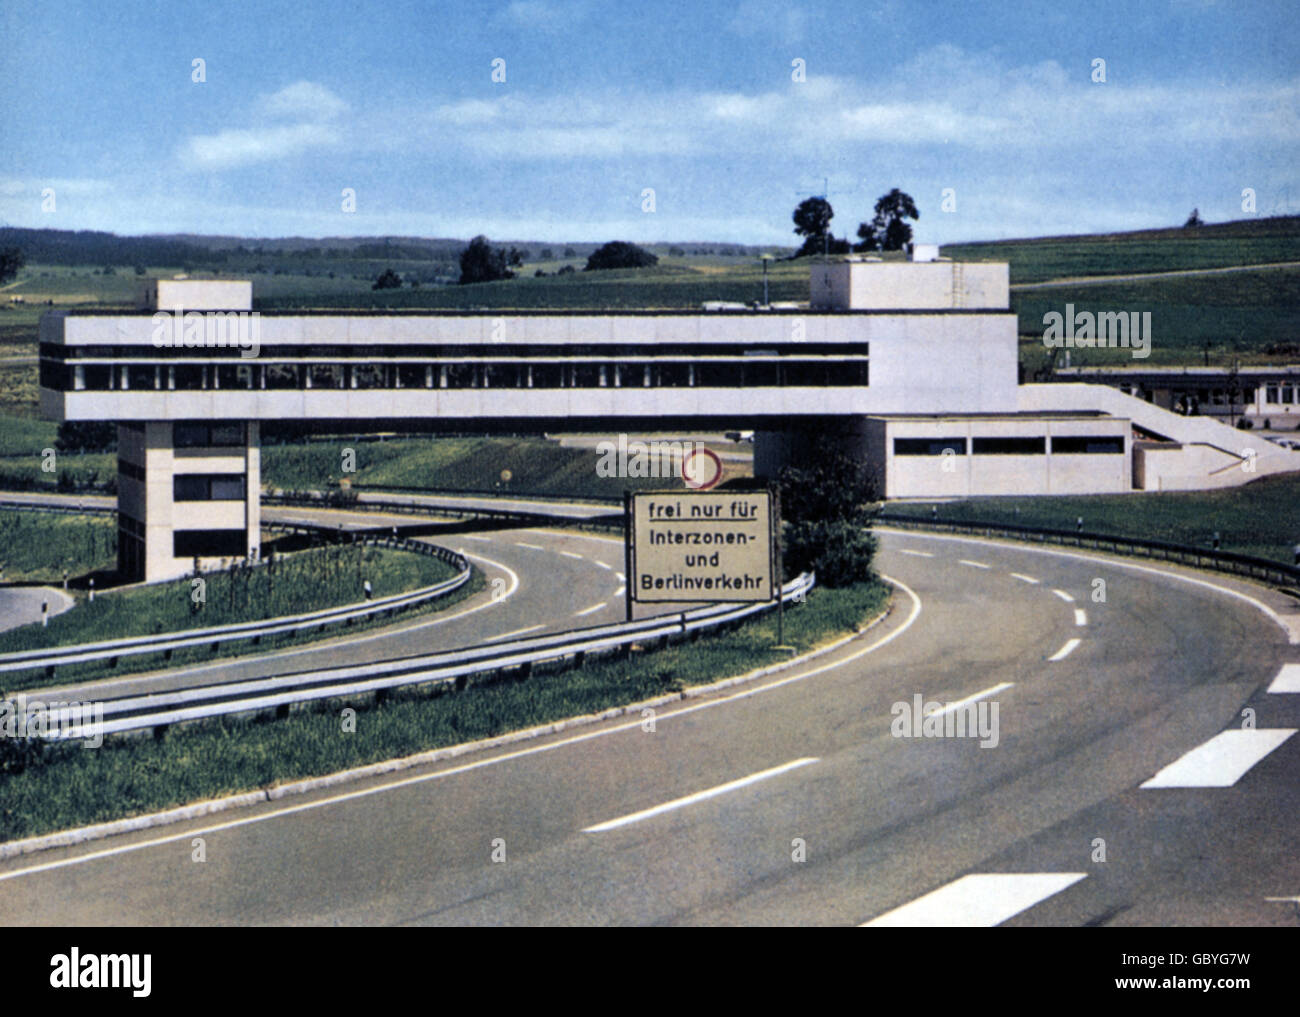 transport / transportation, car, motorway, interzonal route to West Berlin, motorway restaurant, Frankenwald, Rudolphstein, 1970s, Additional-Rights-Clearences-Not Available Stock Photo